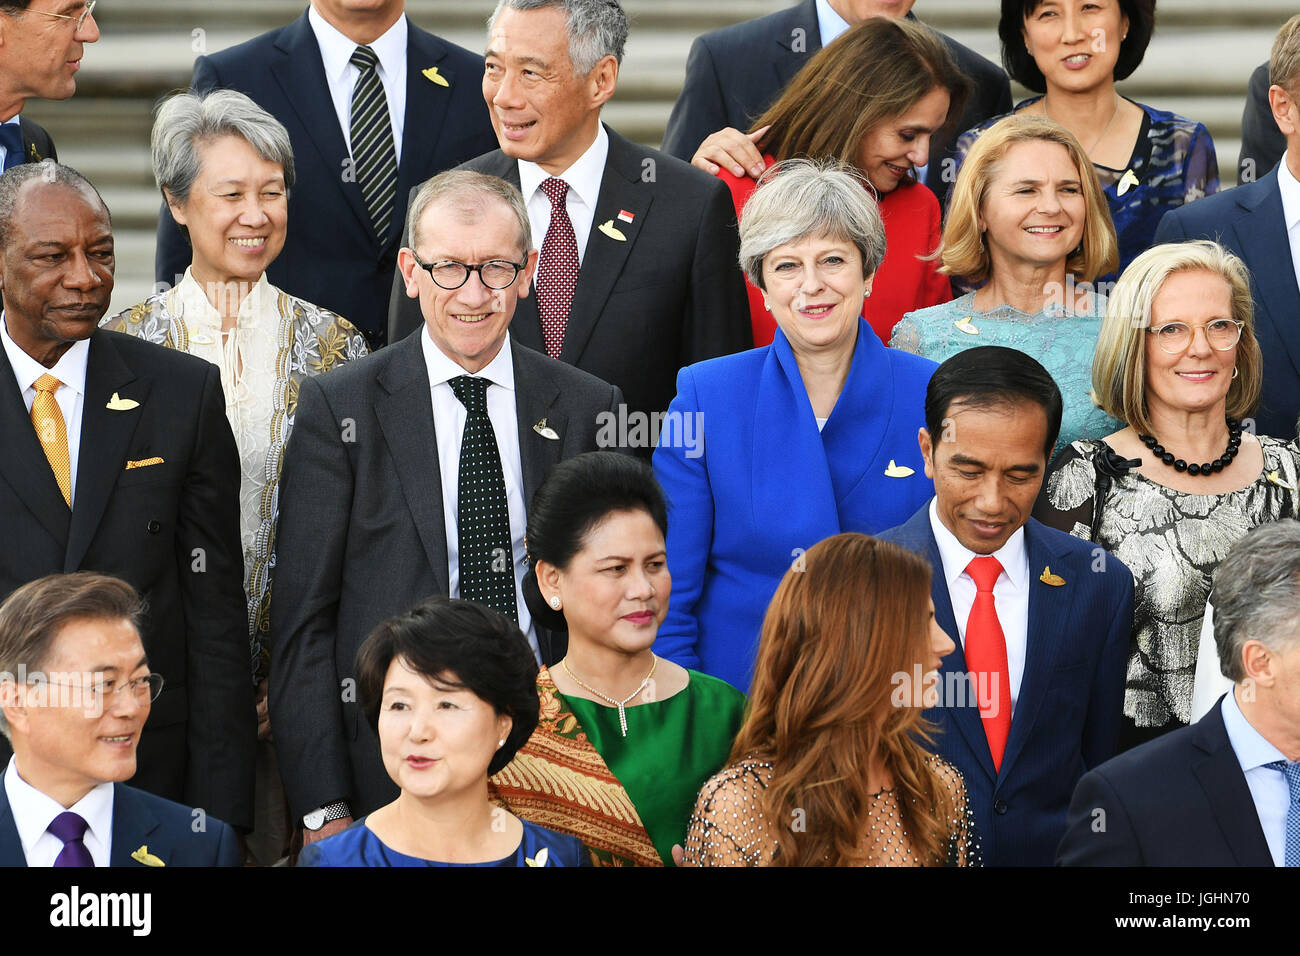 Prime Minister Theresa May and her husband Philip during a group photo as G20 leaders and their spouses arrive to attend a concert at the Elbphilharmonie concert hall in Hamburg. Stock Photo